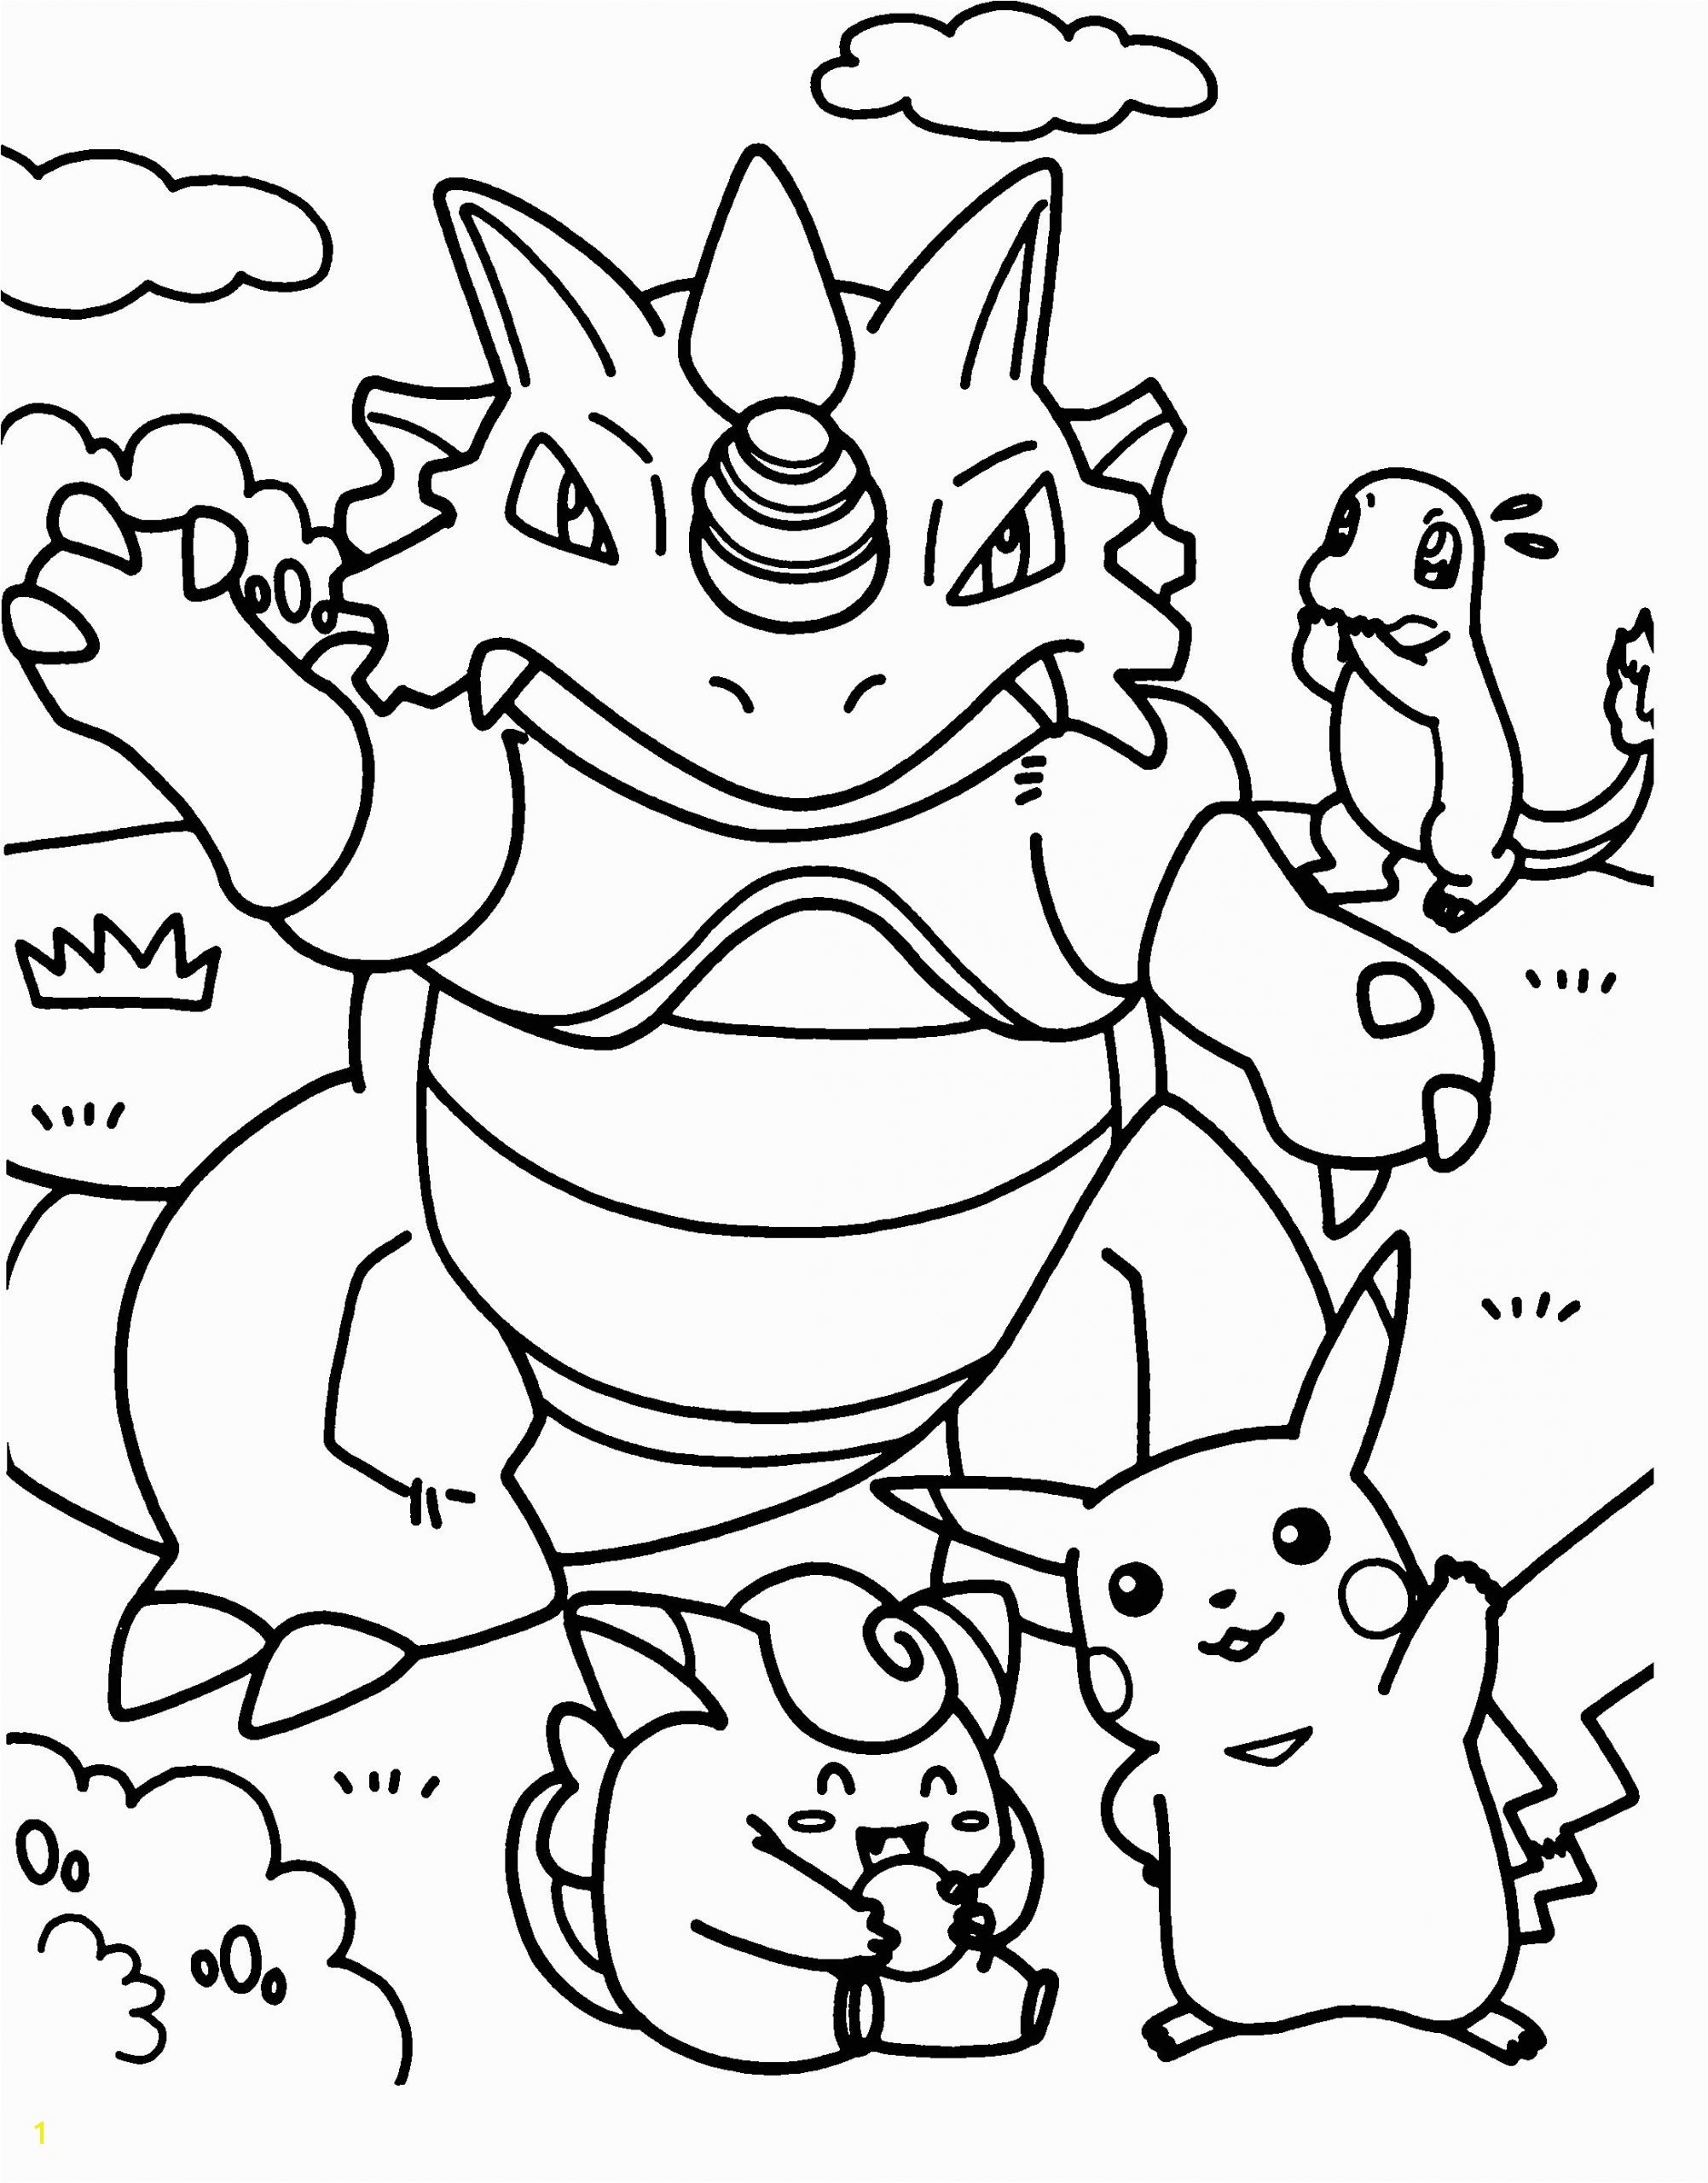 Pokemon Coloring Pages to Print for Free Pokemon Coloring Pages for Kids Printable